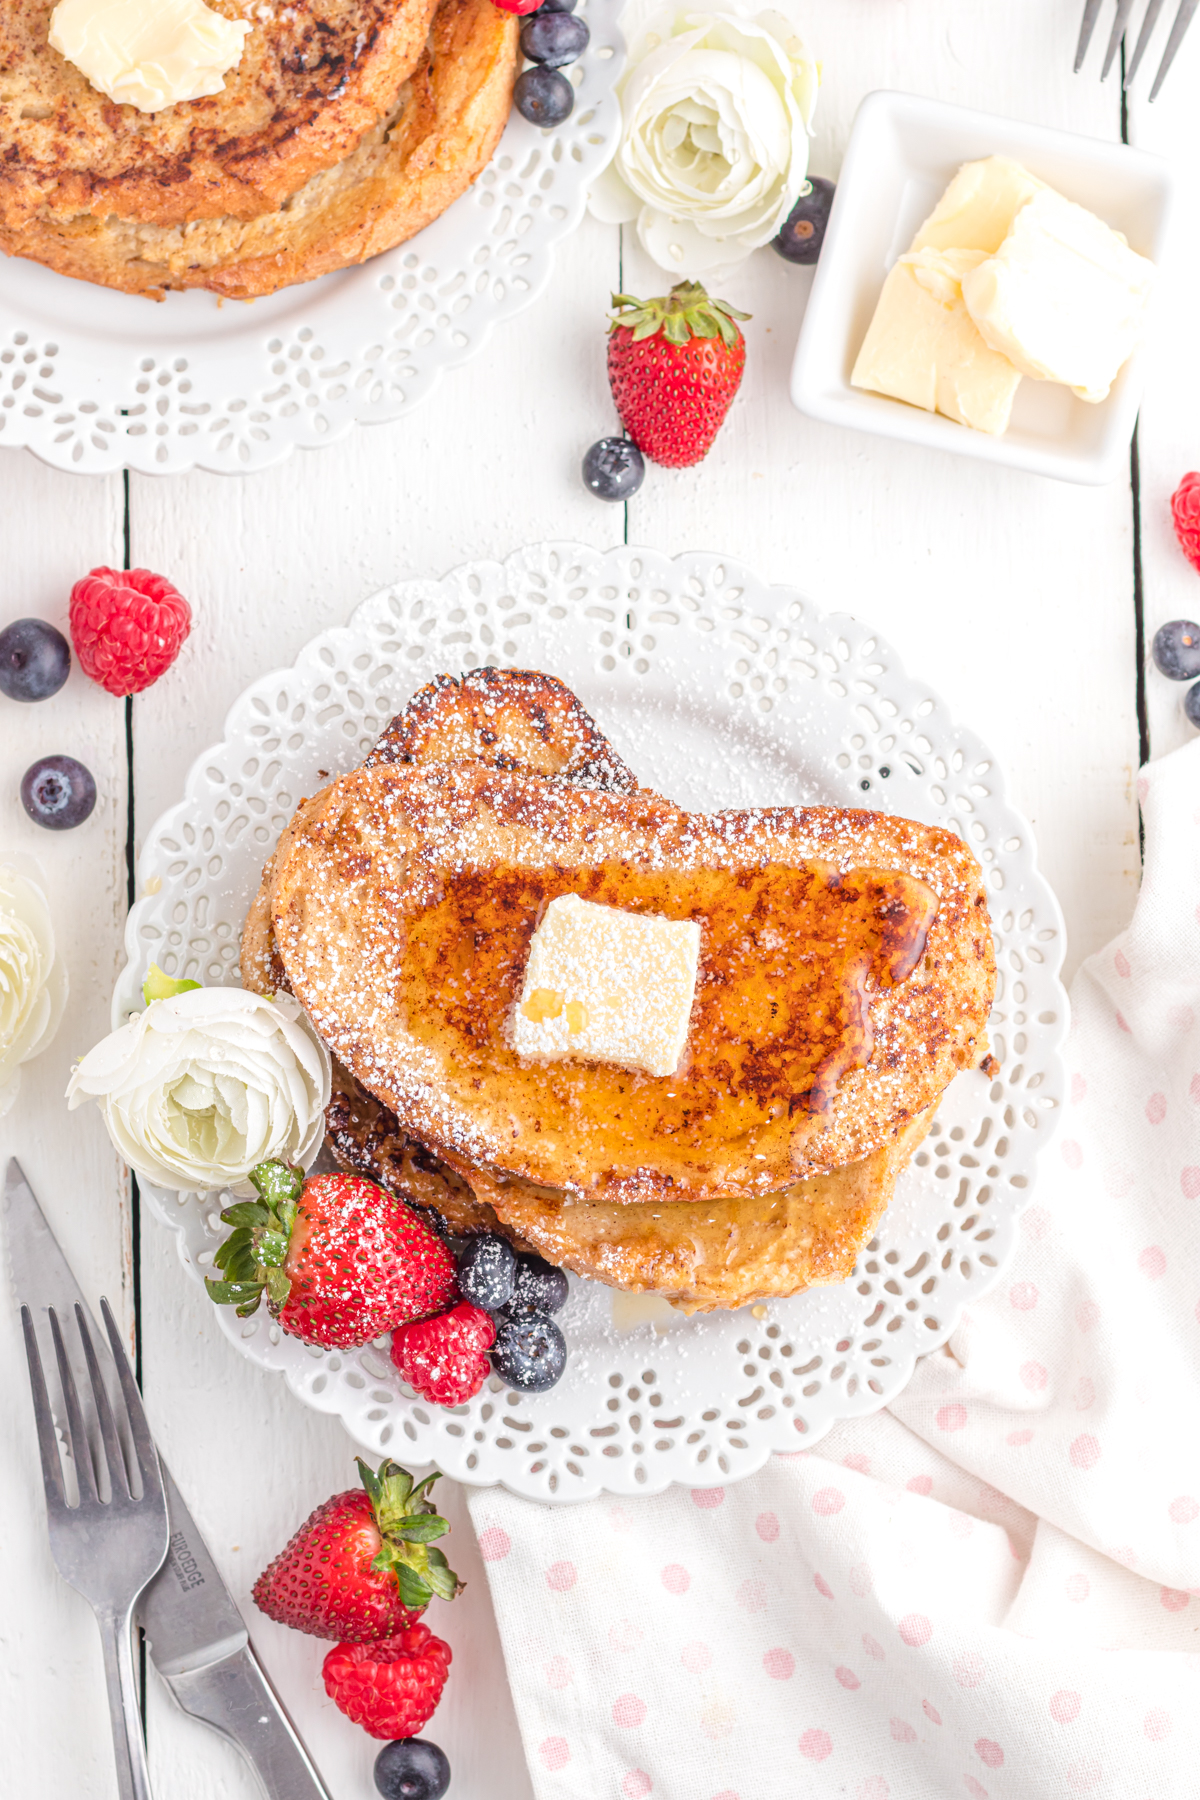 Sourdough French toast on plate with berries.